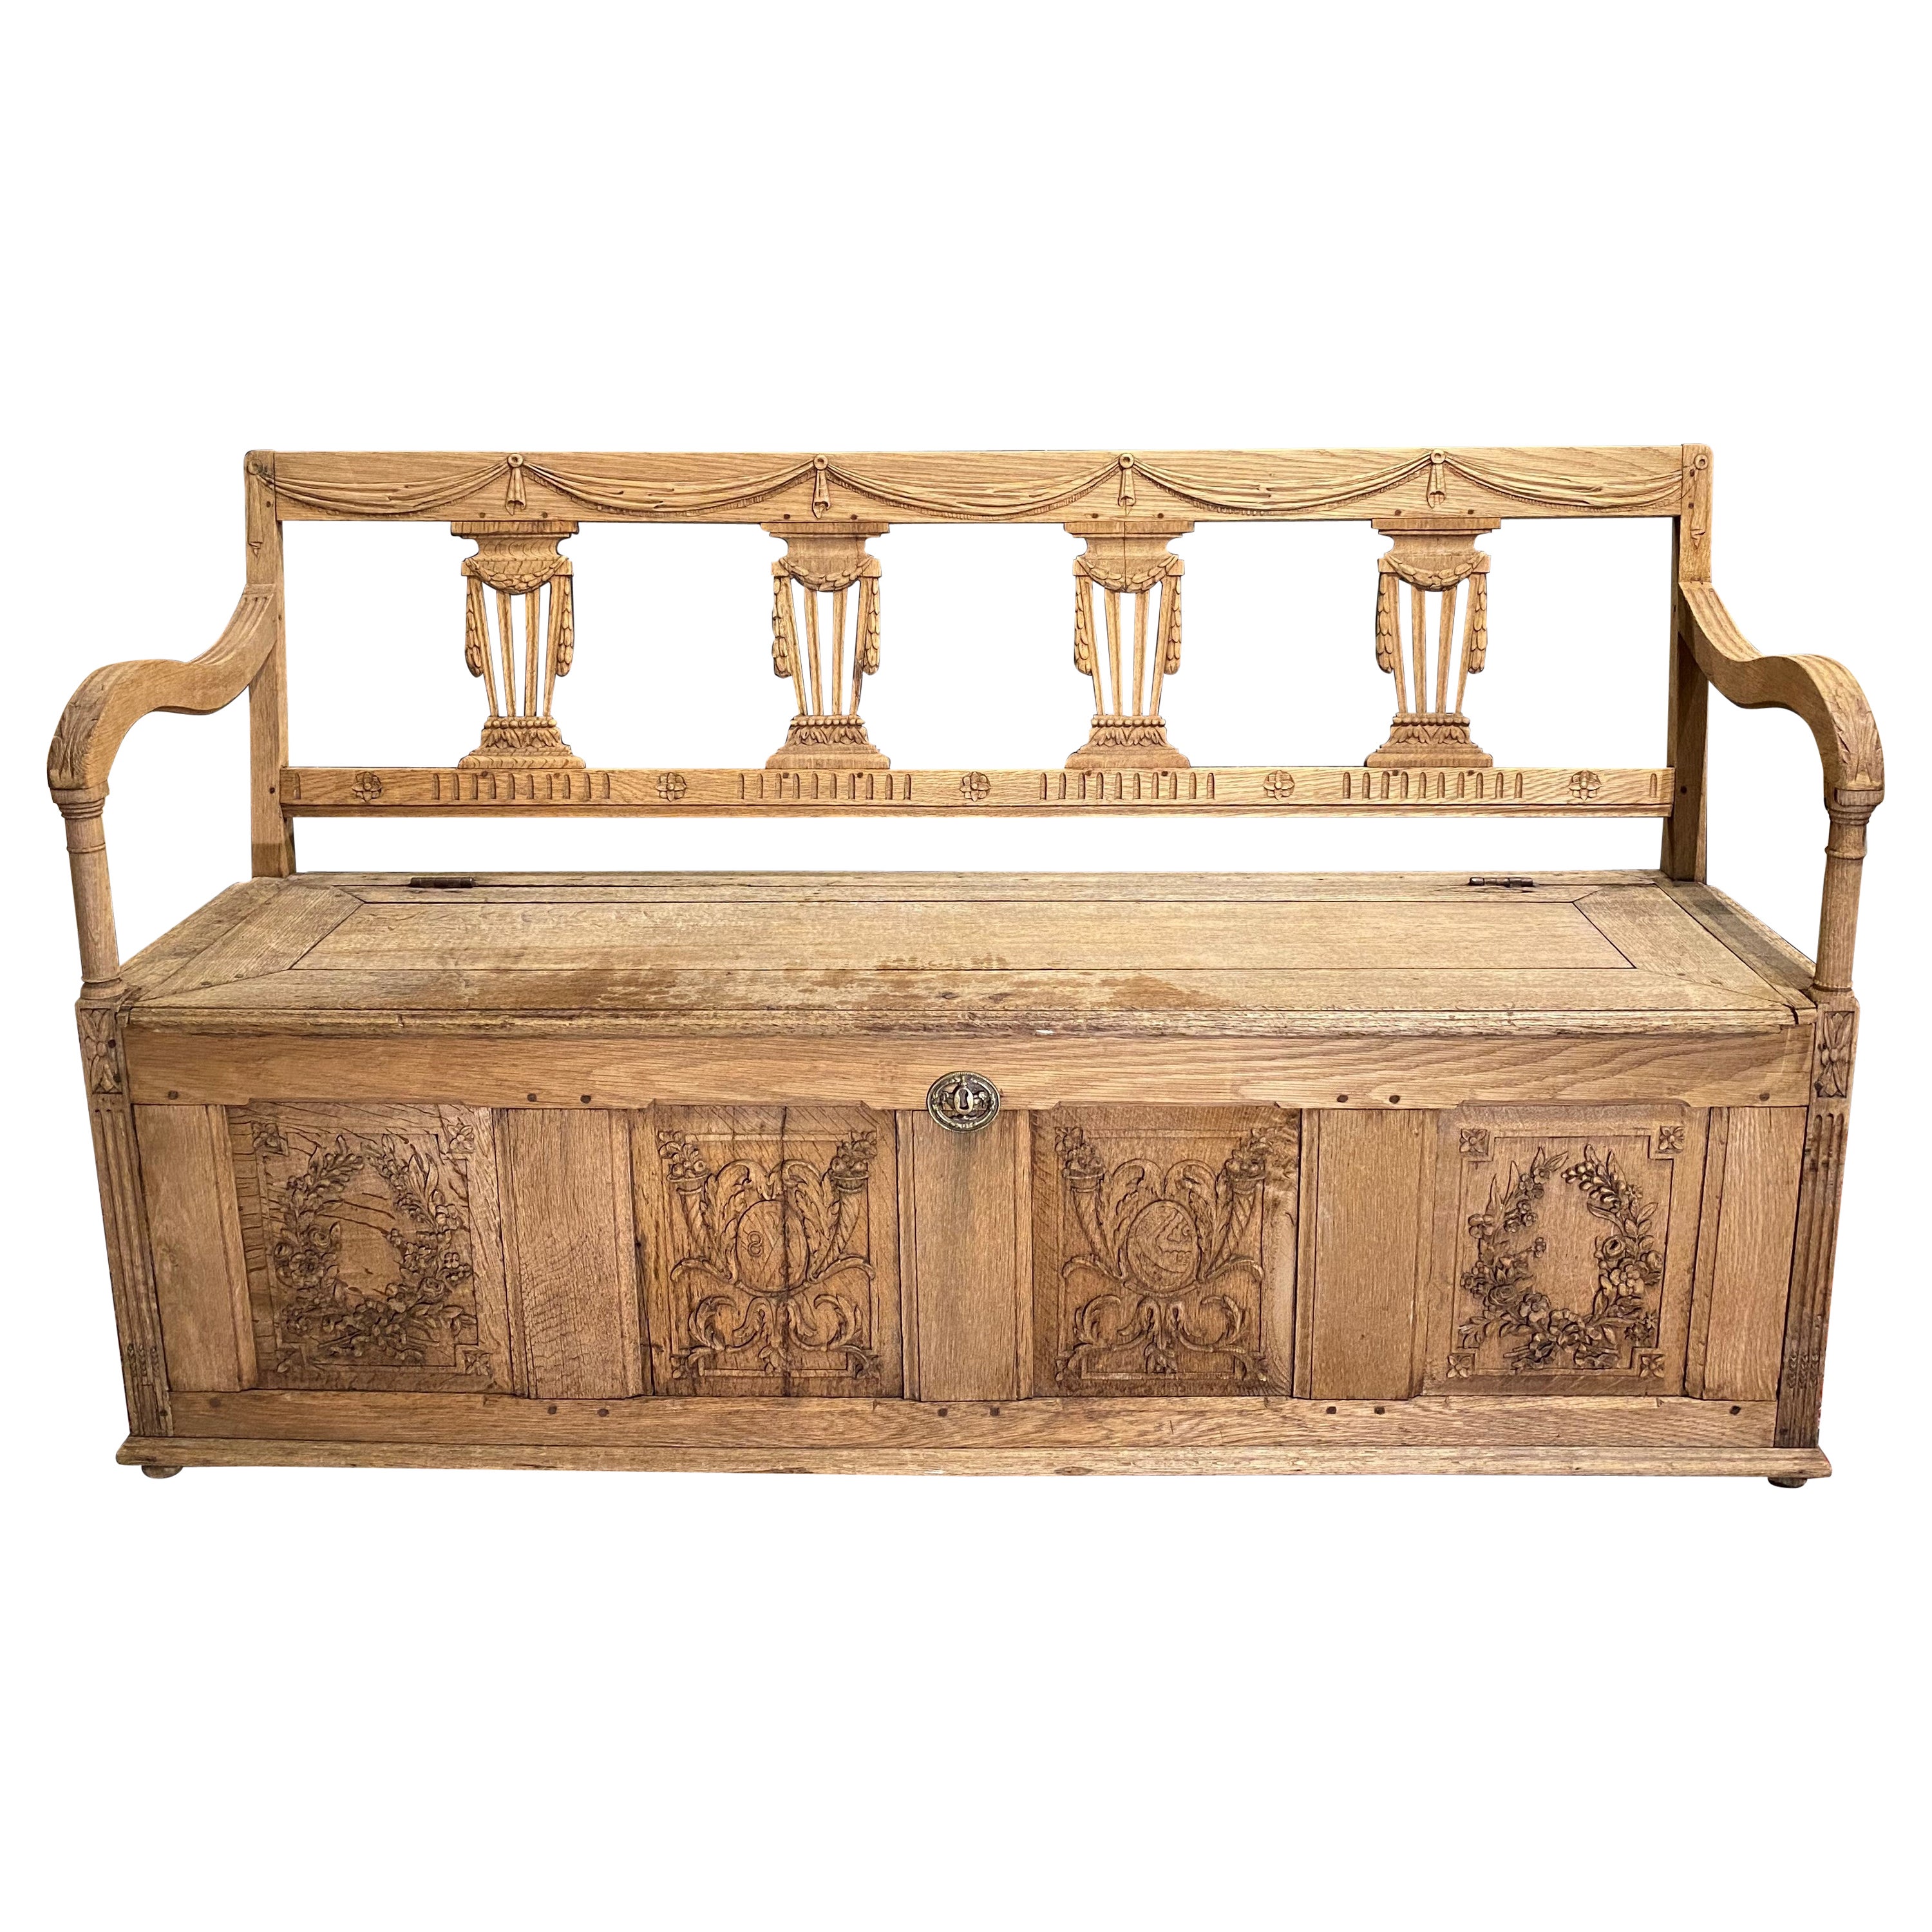 19th Century Swedish Carved Bench or Settee with Lift Top